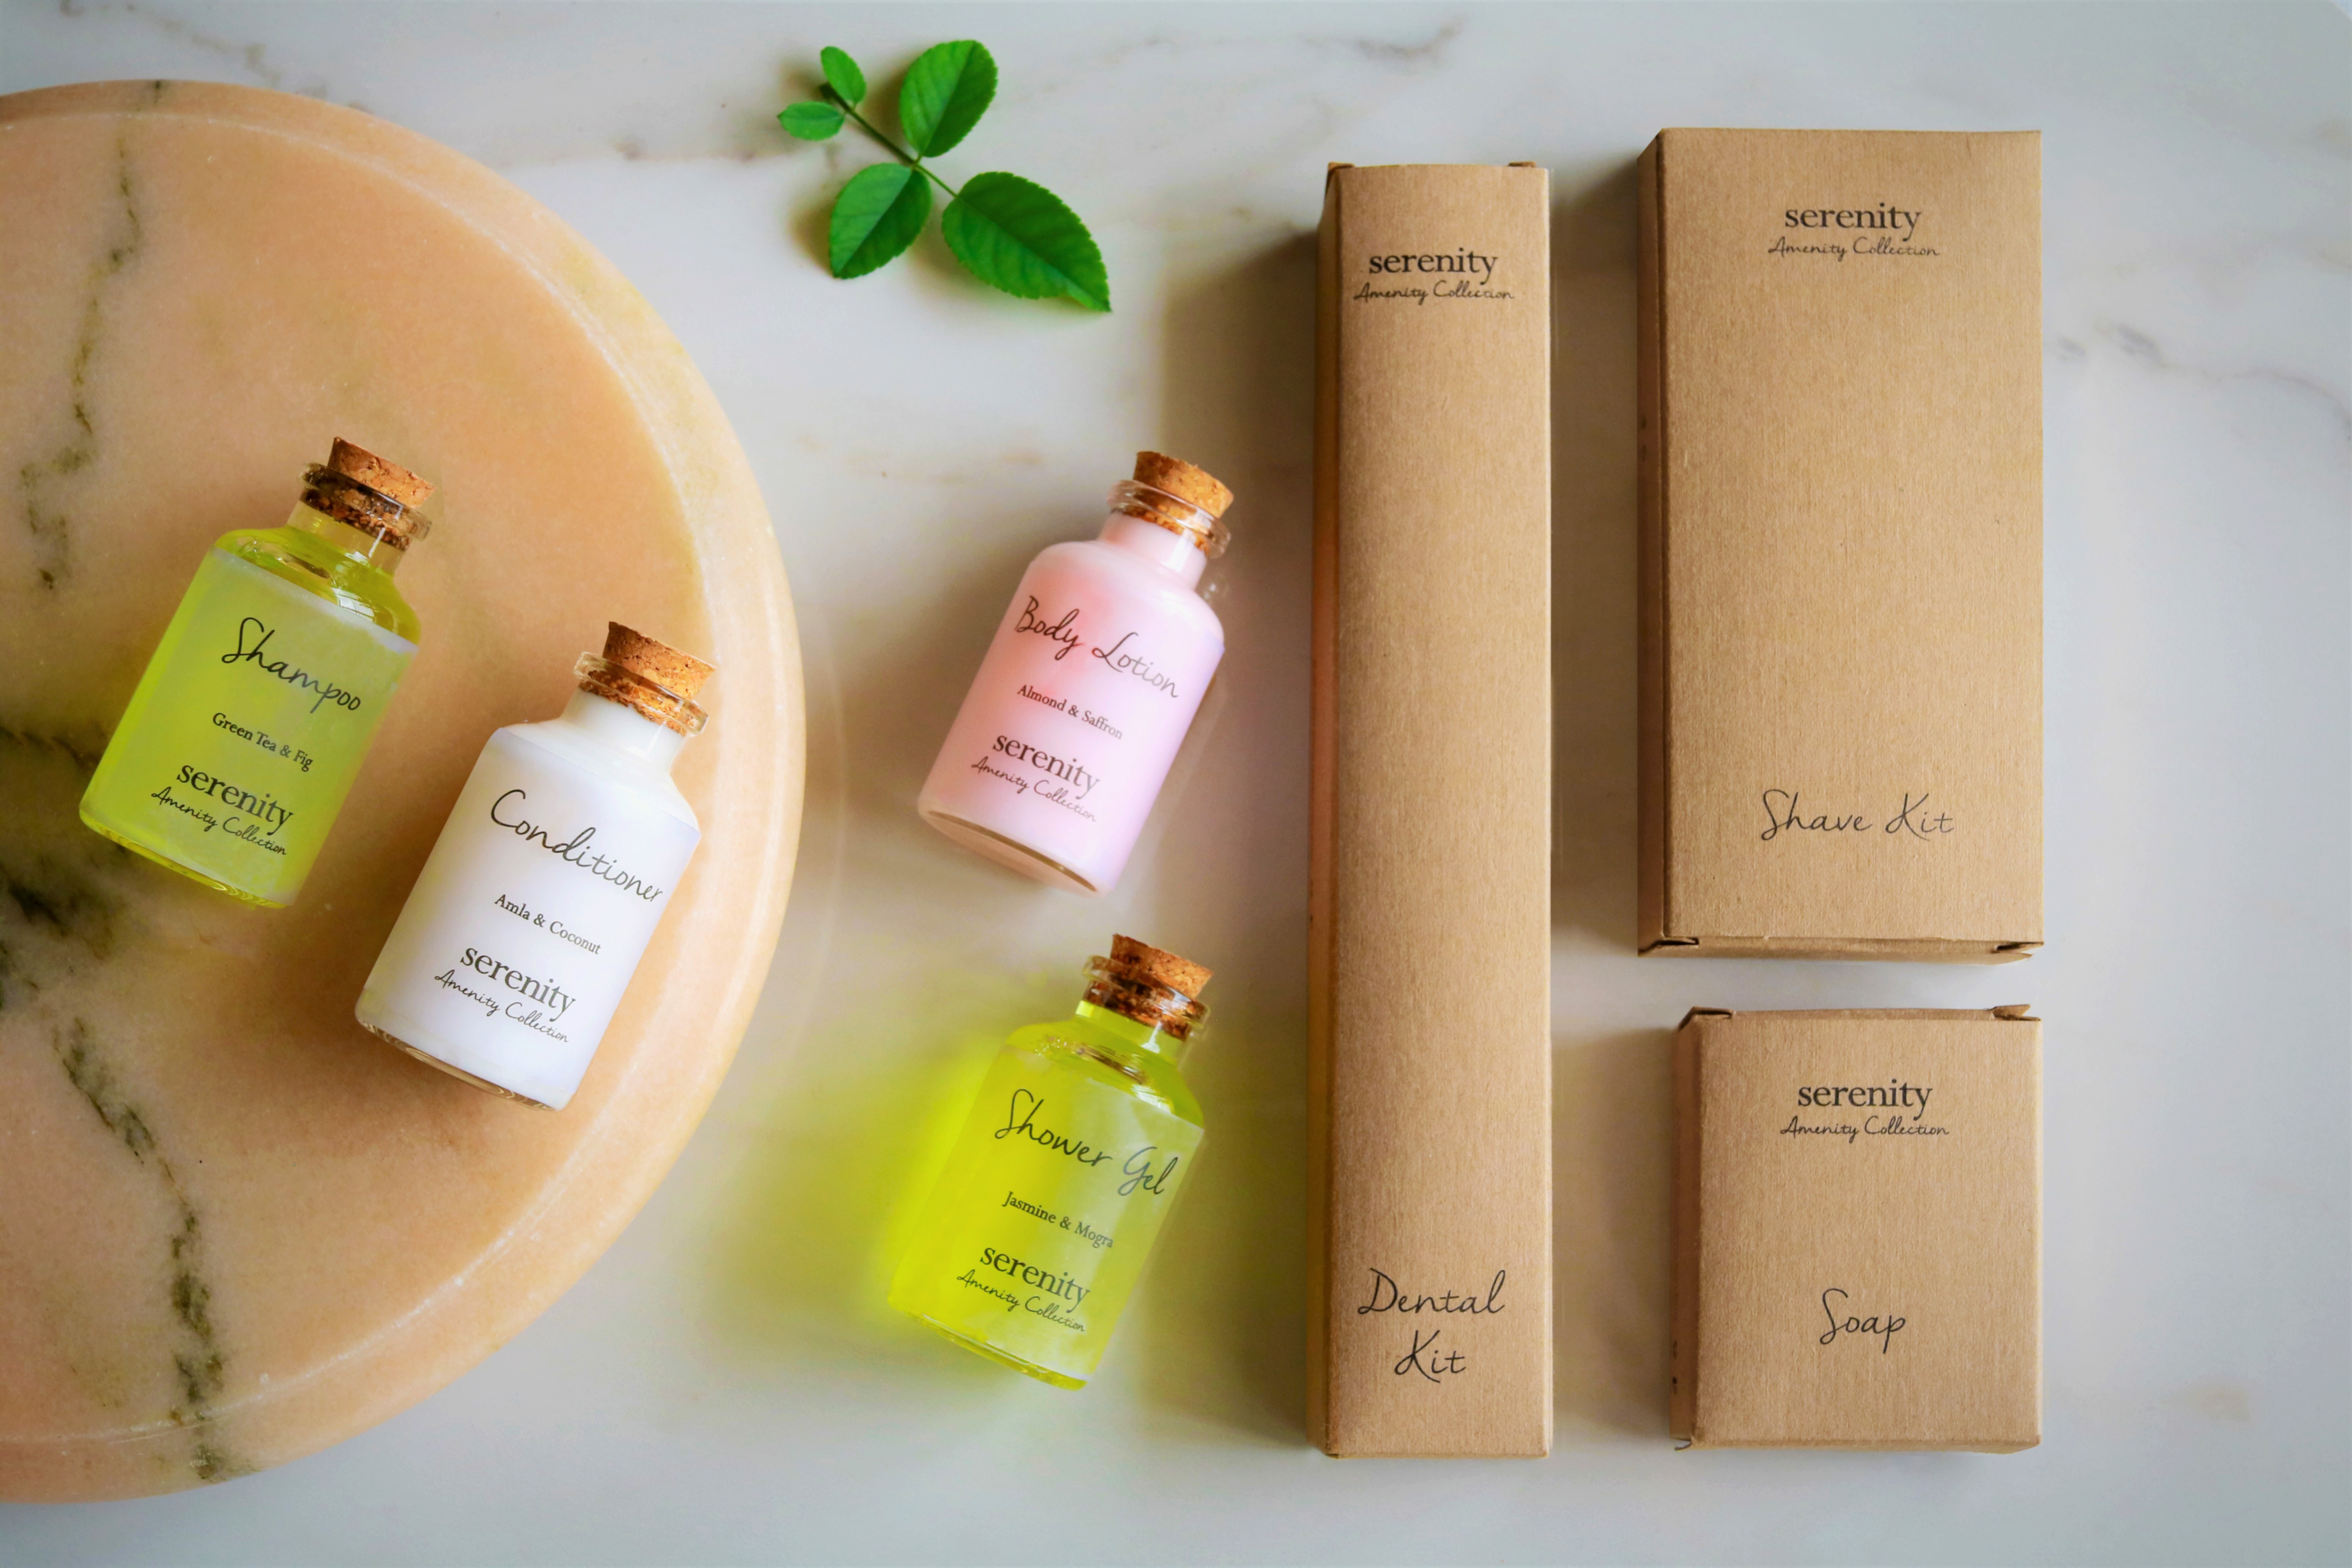 Assortment of bespoke amenities and toiletries for hotels